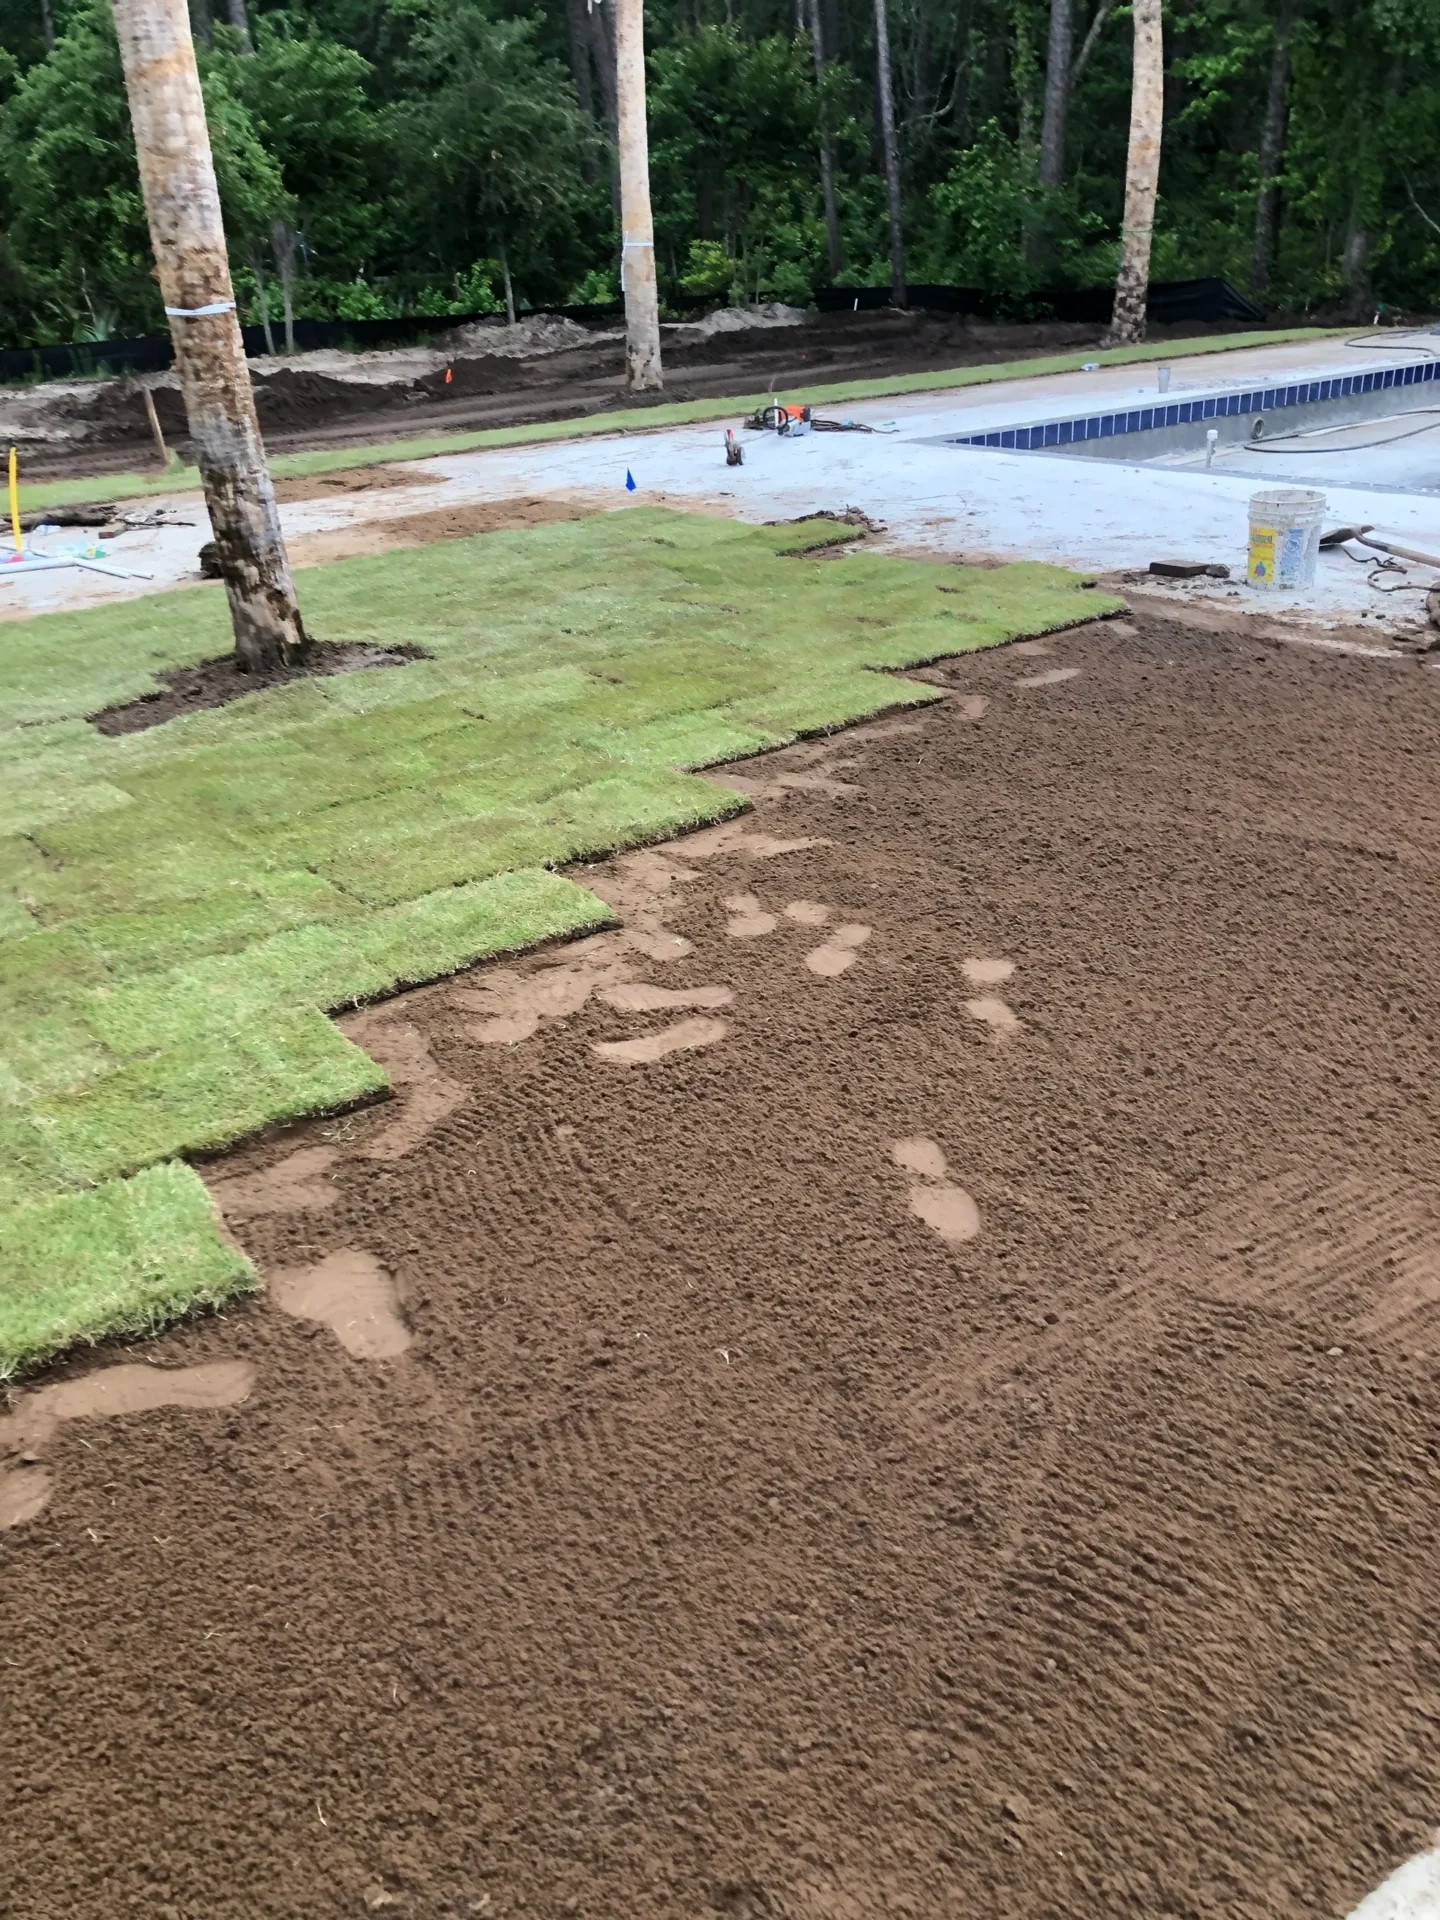 A green patch of grass is being laid on the ground.